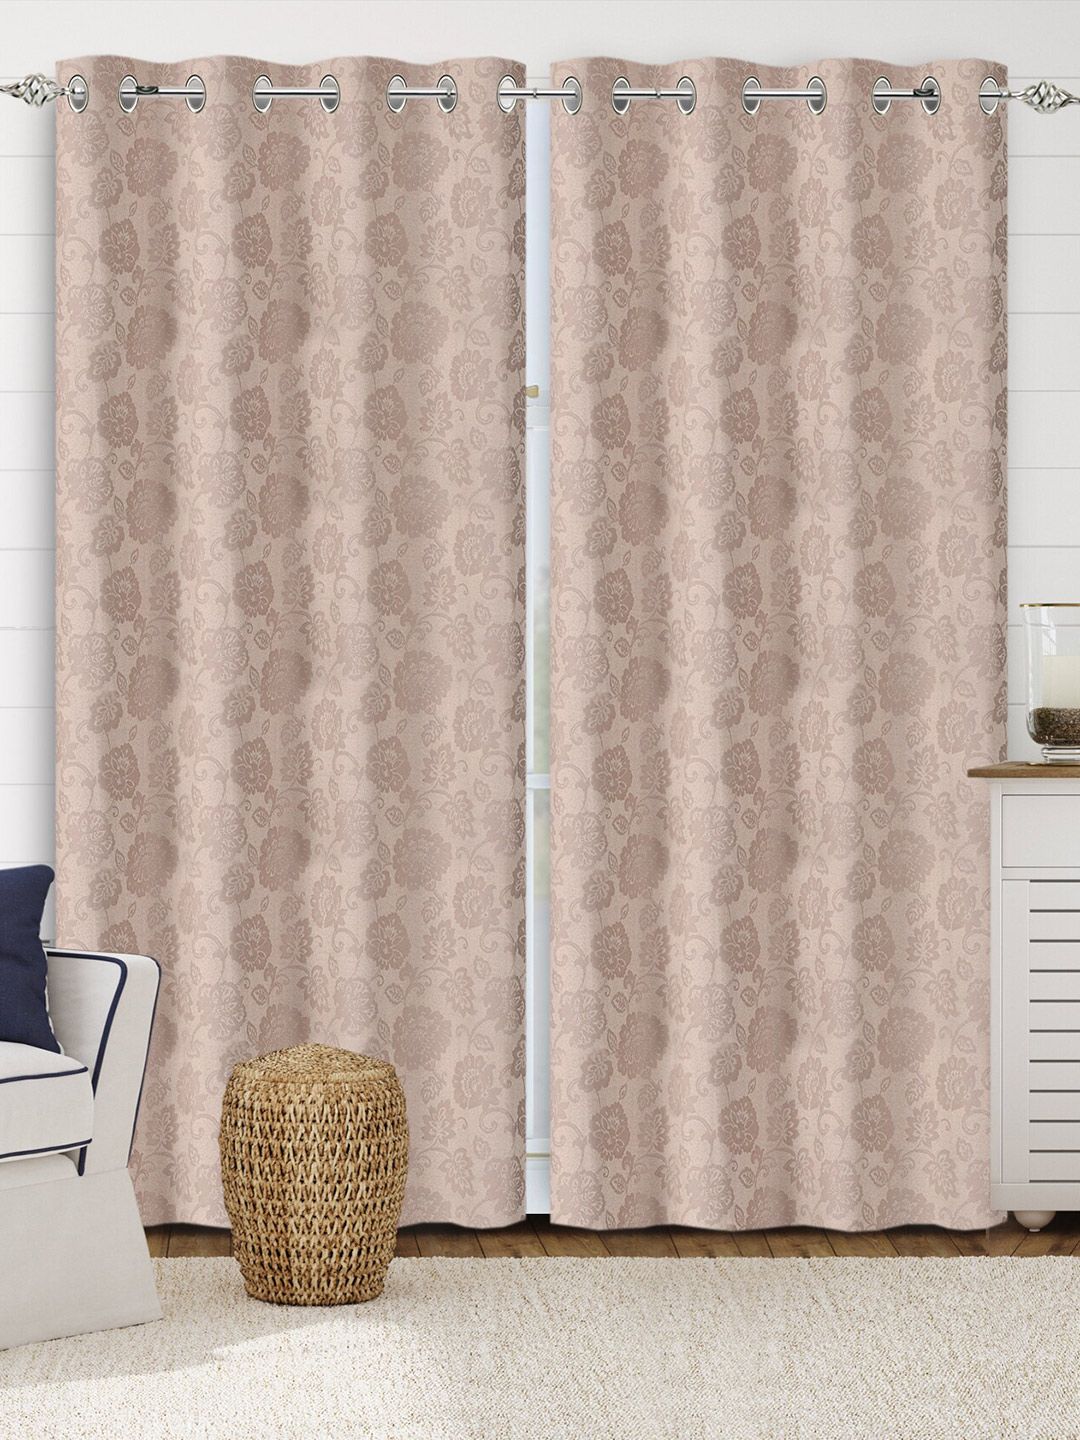 Saral Home Beige Set of 2 Floral Cotton Black Out Door Curtains Price in India